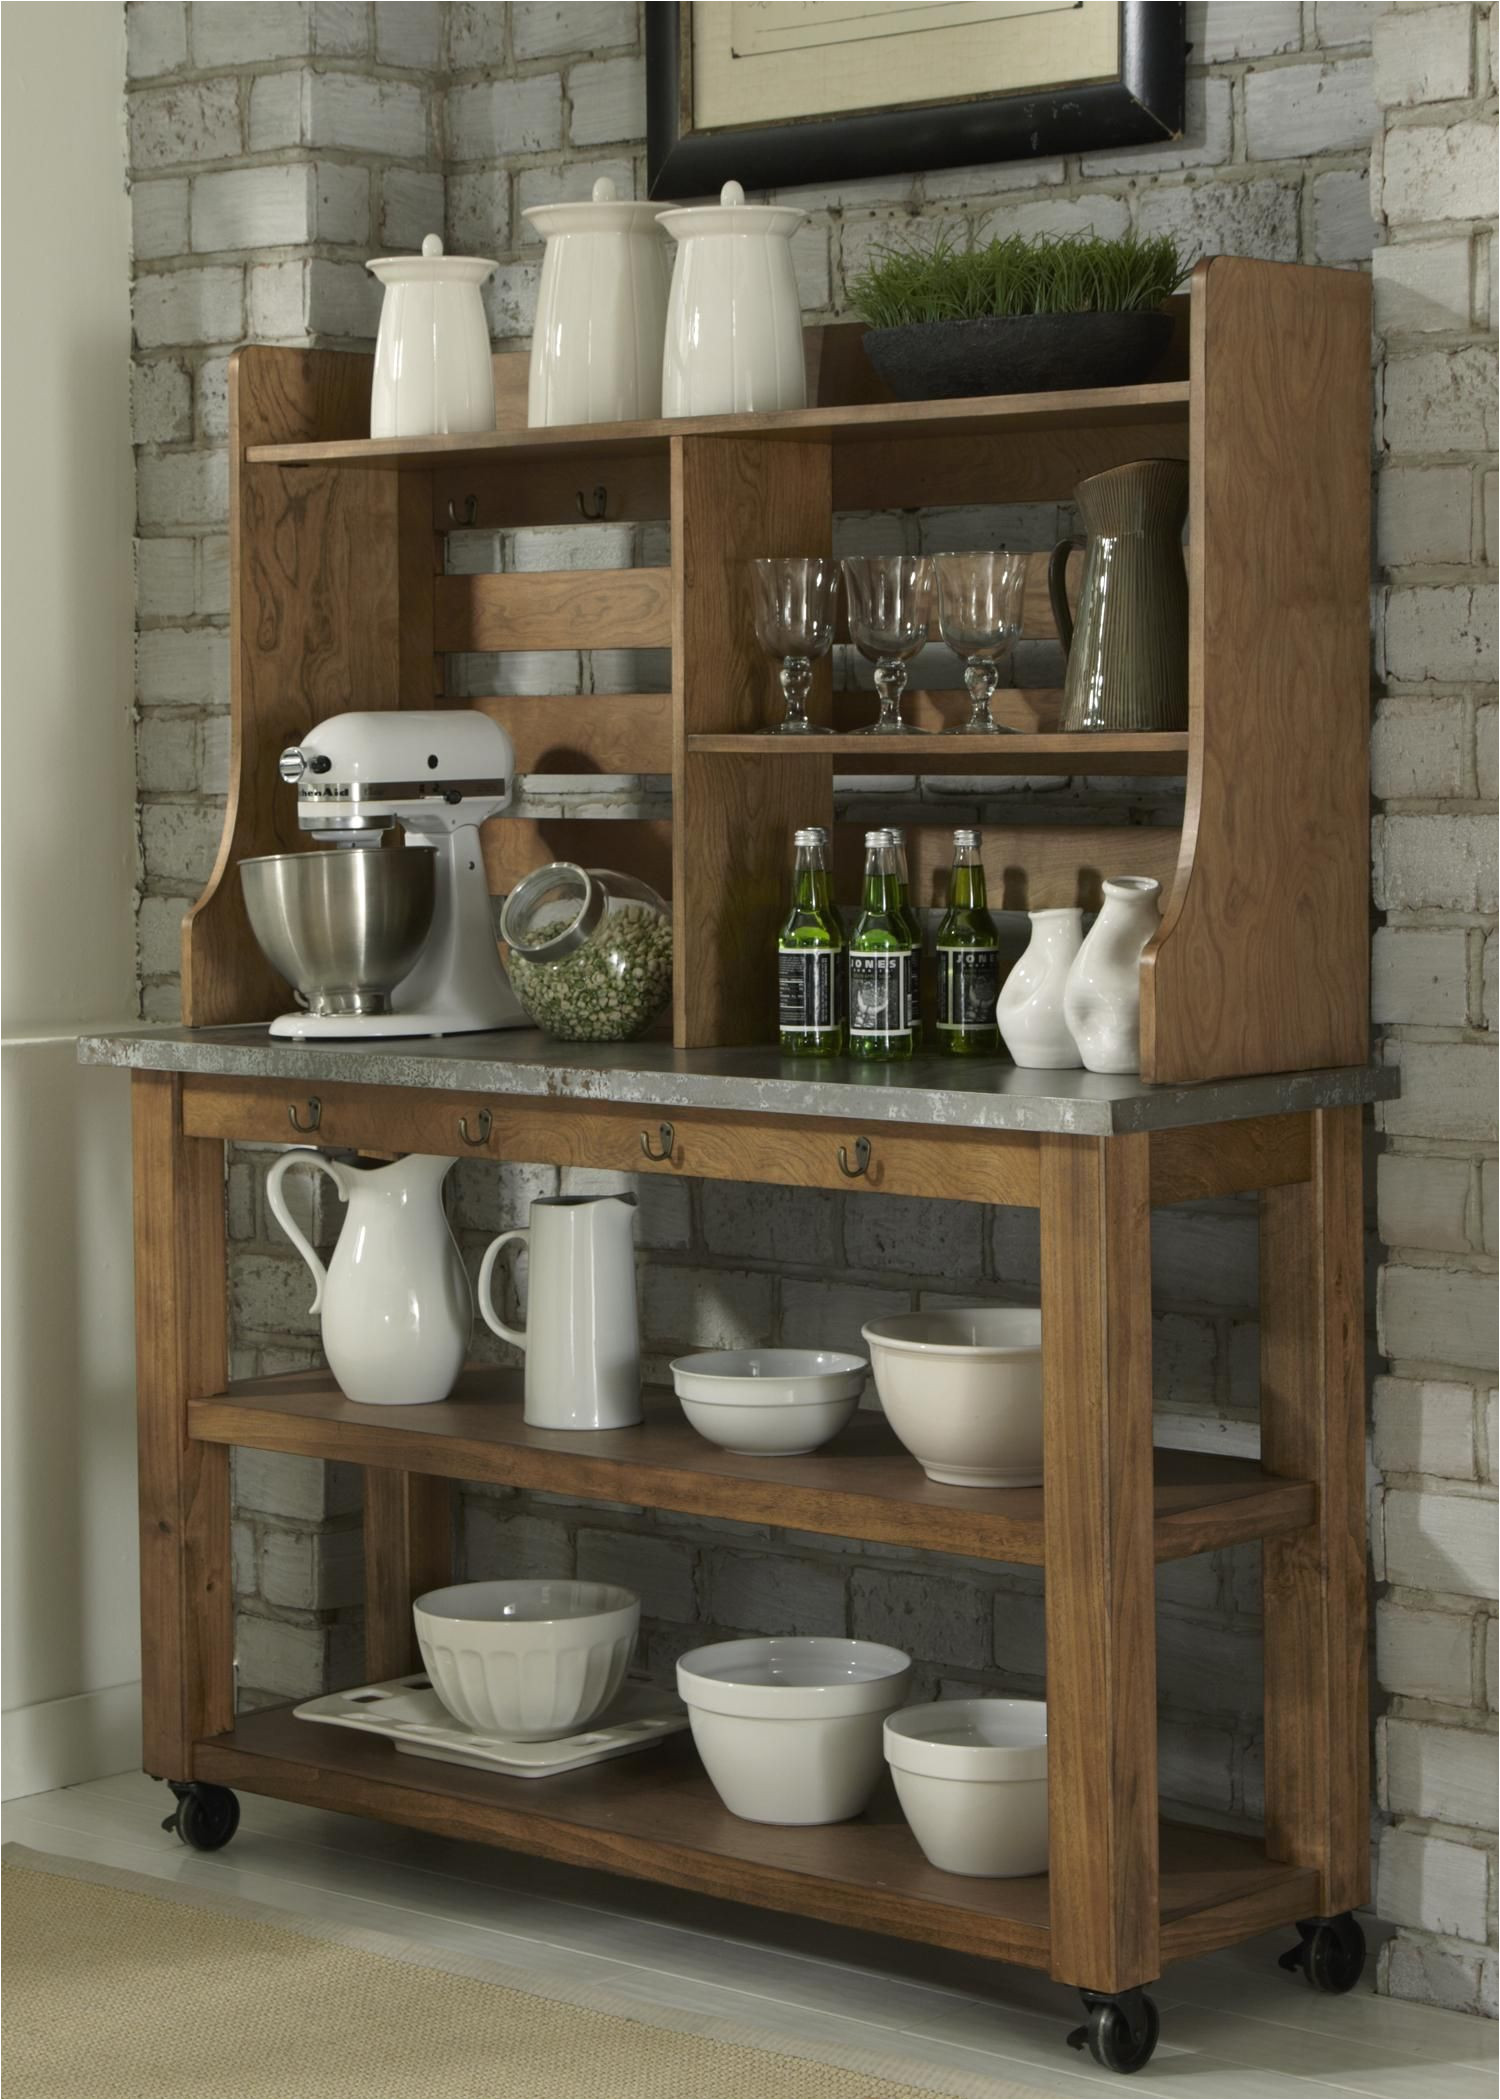 wooden baker rack furniture for kitchen stuffs grey wall and warm carpet